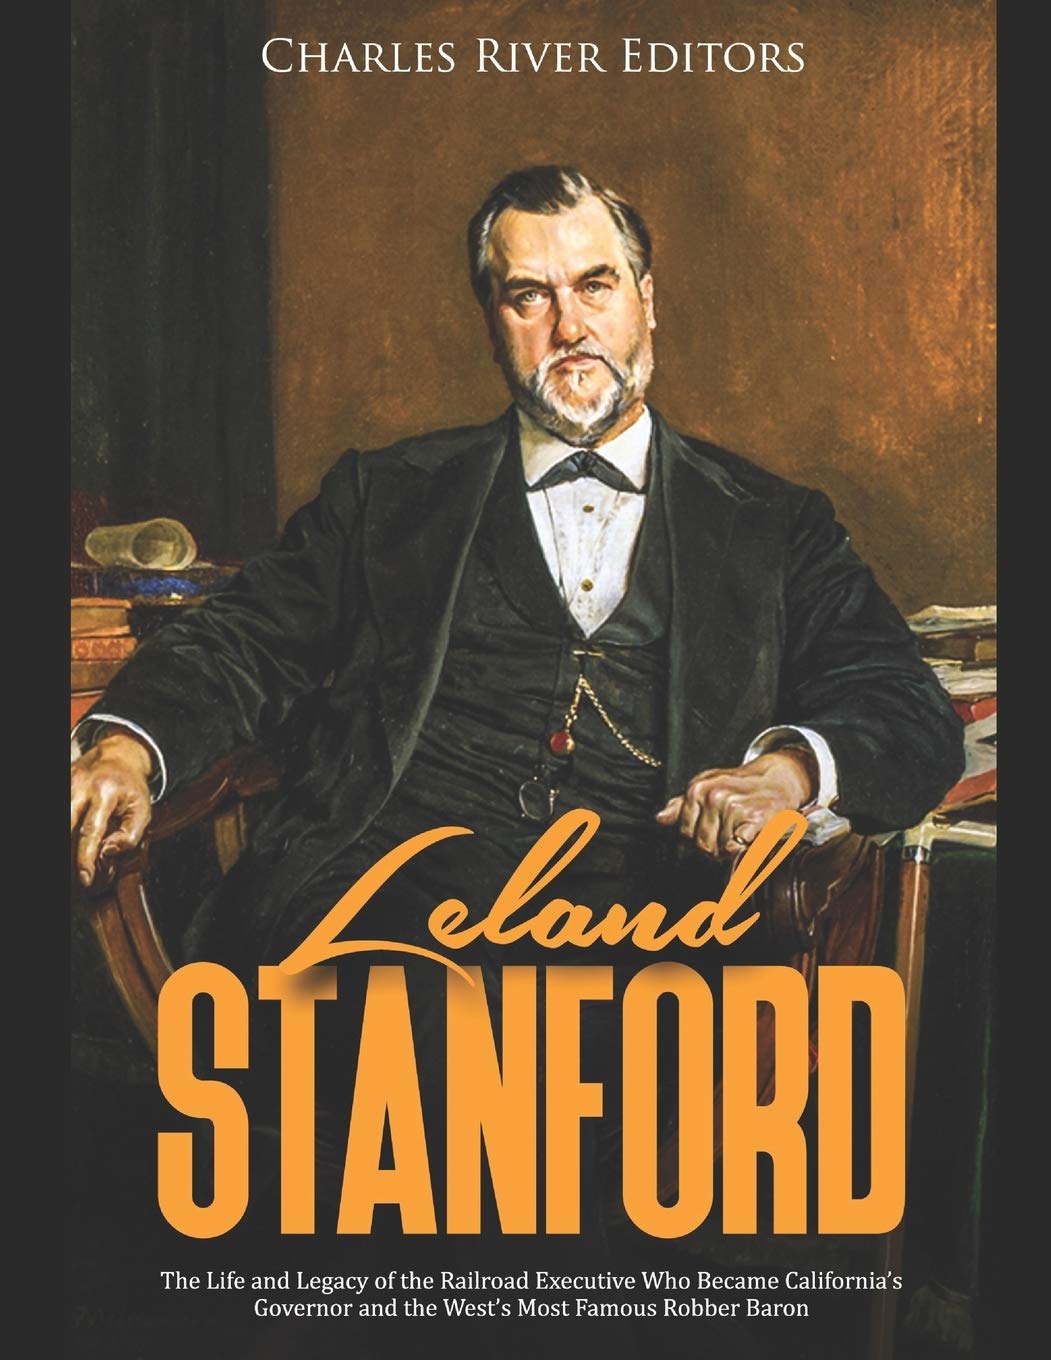 Leland Stanford: The Life and Legacy of the Railroad Executive Who Became California’s Governor and the West’s Most Famous Robber Baron